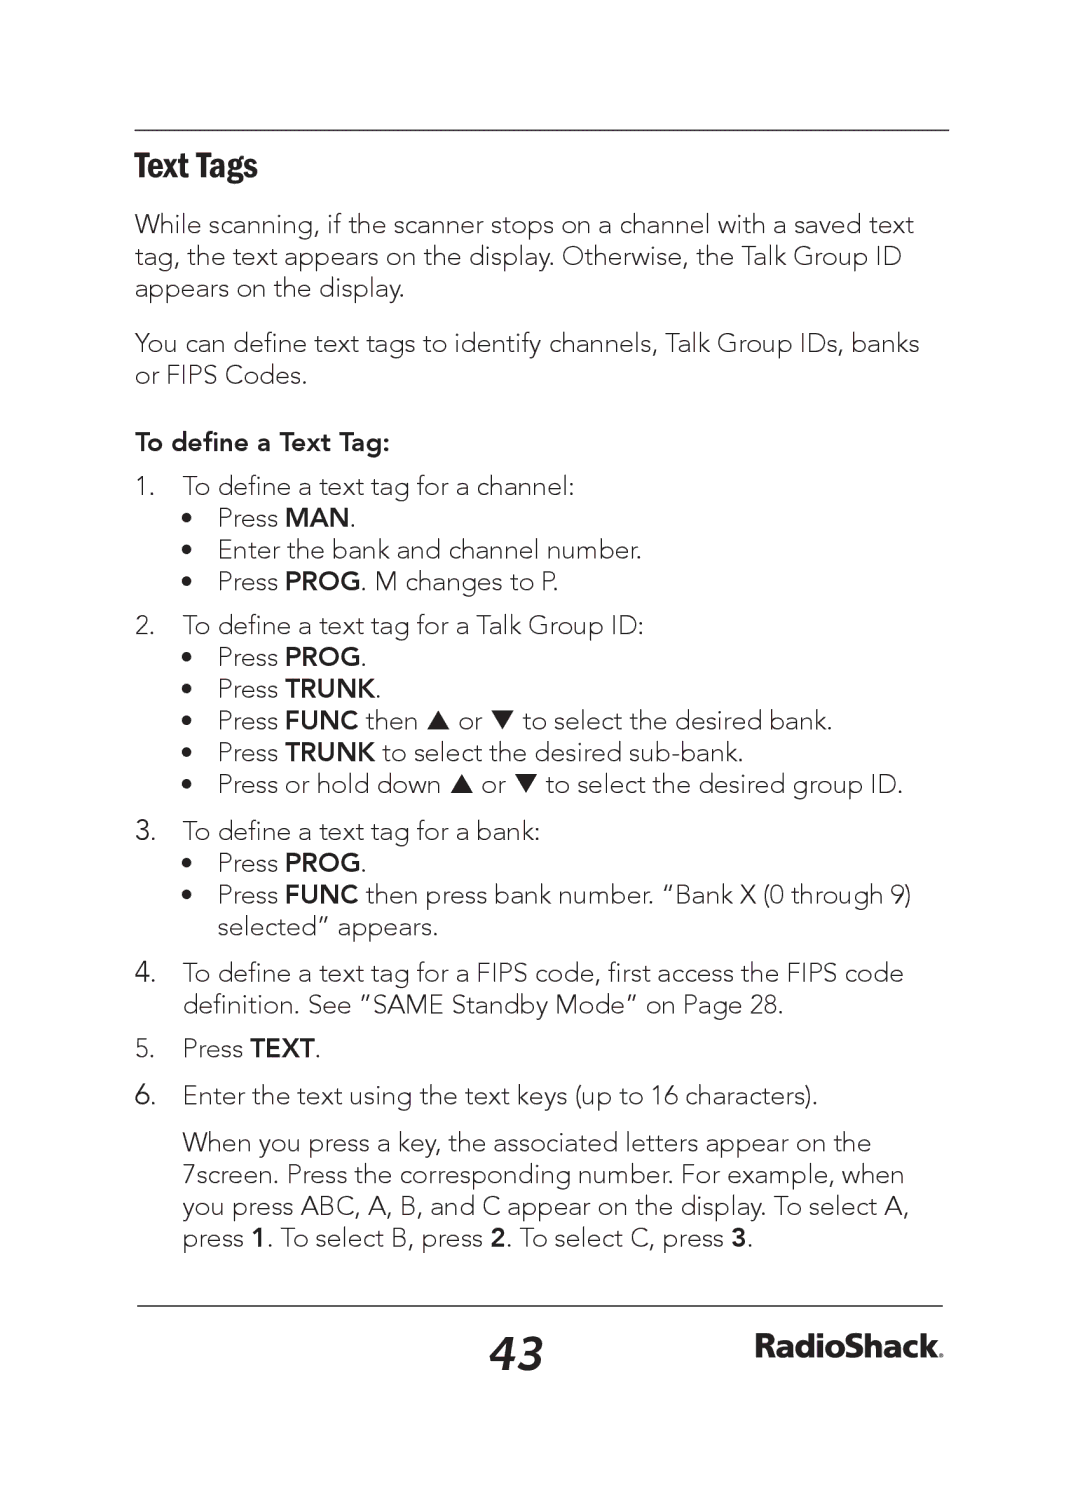 Radio Shack 20-163 manual Text Tags, To define a Text Tag 